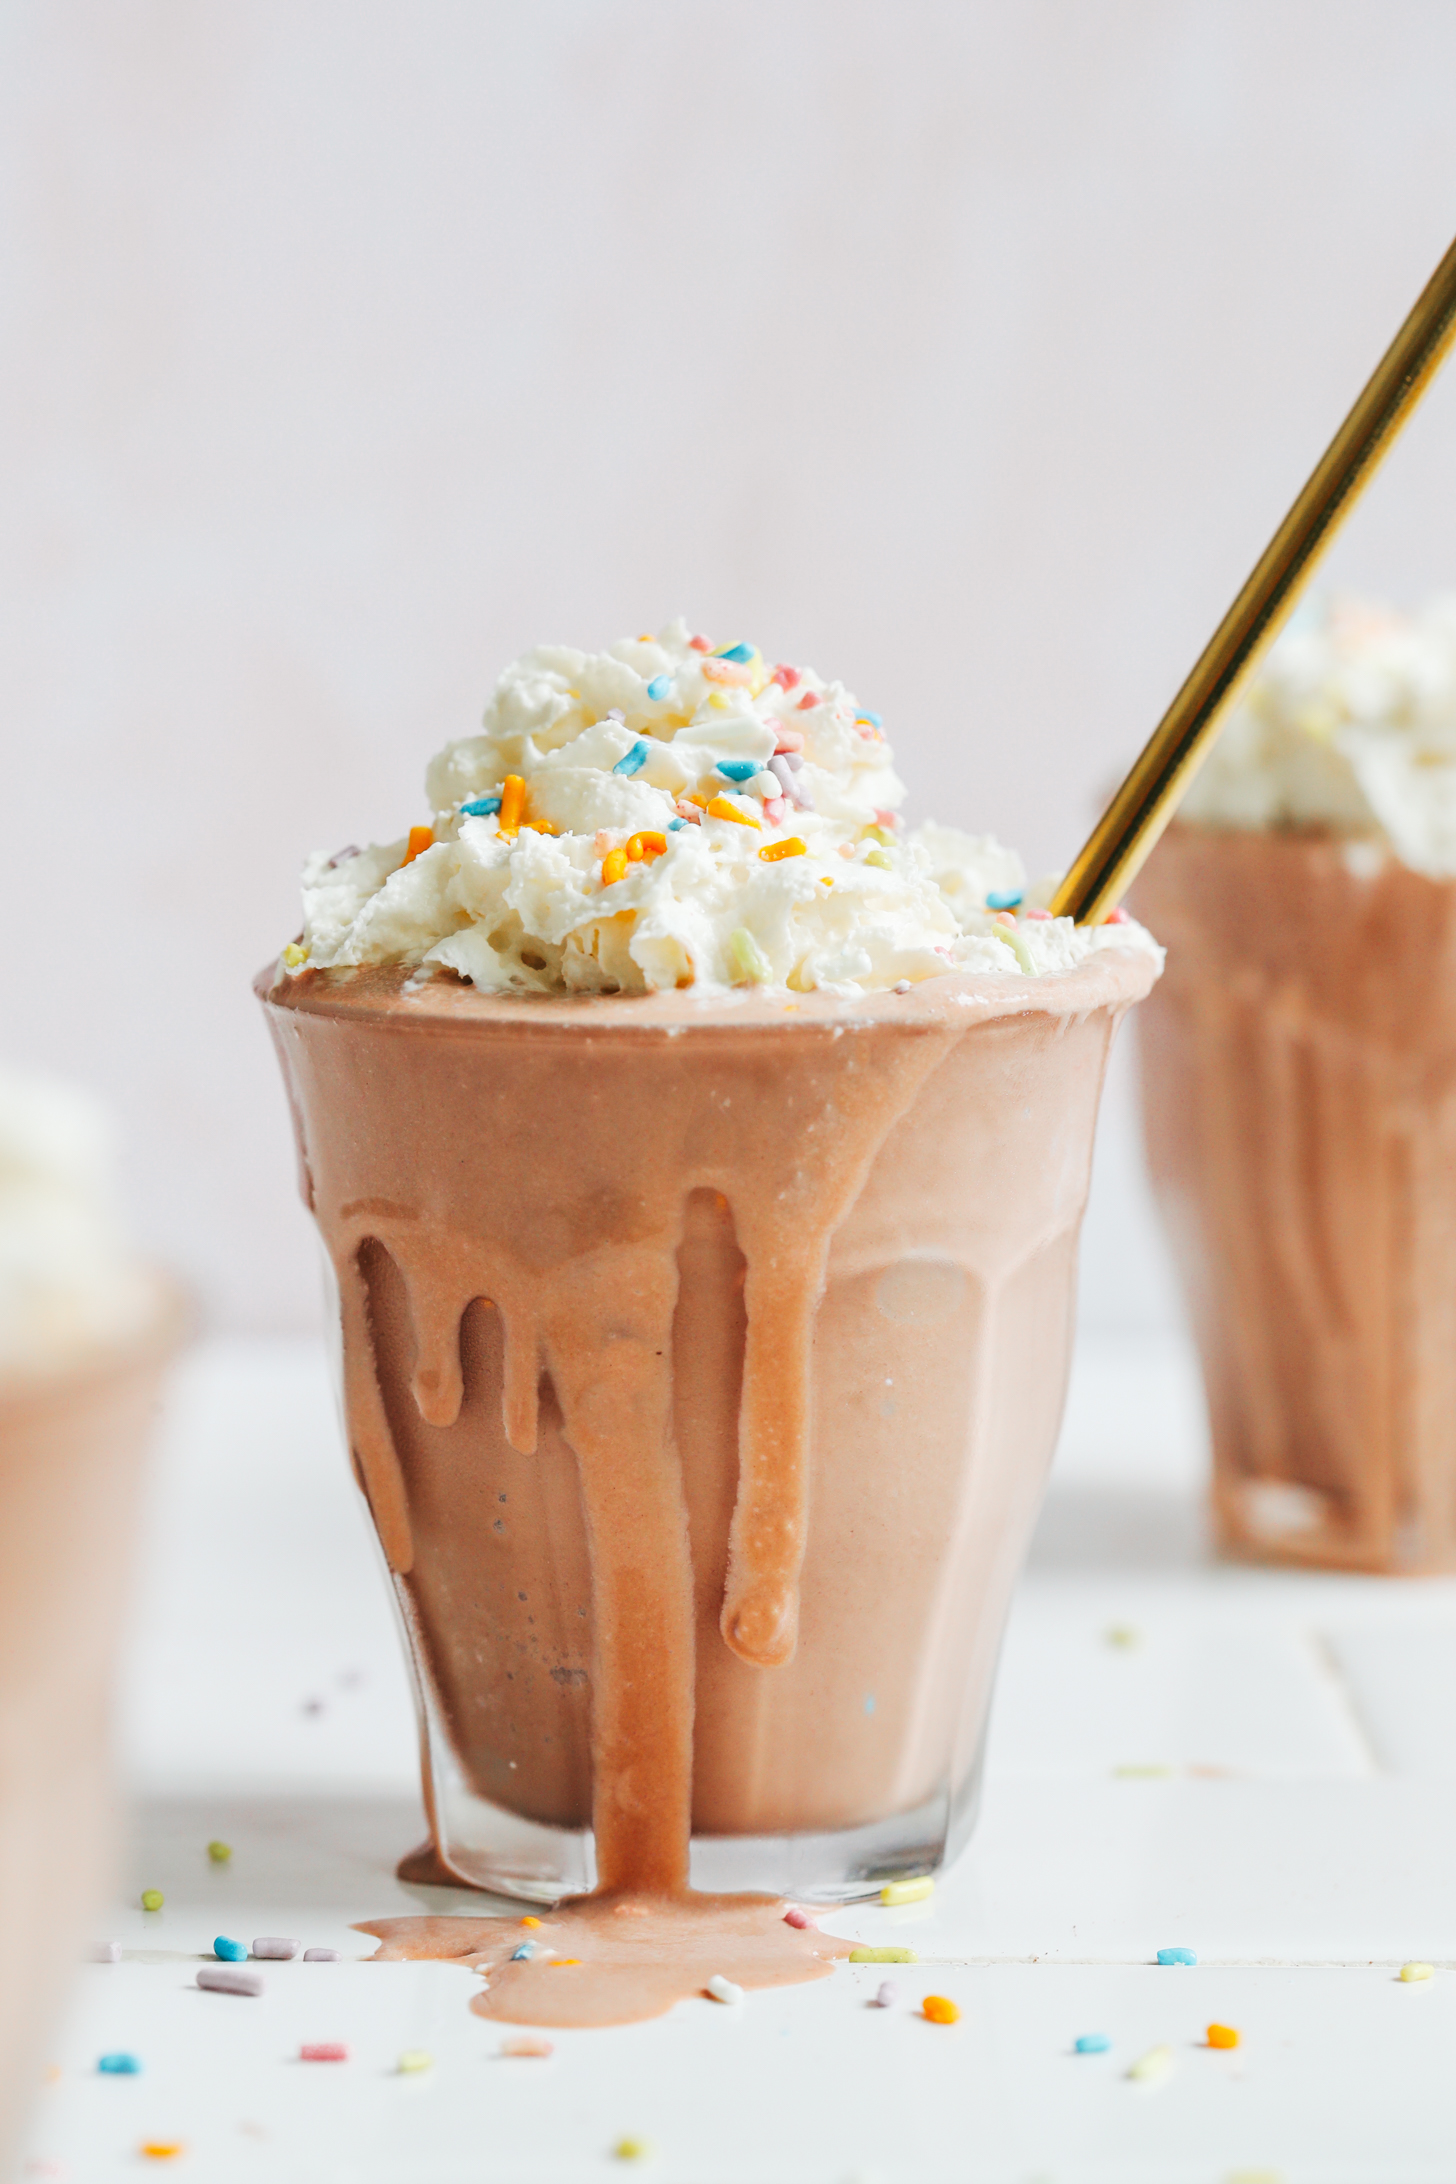 Overflowing glass filled with a vegan chocolate milkshake topped with dairy-free whipped cream and sprinkles